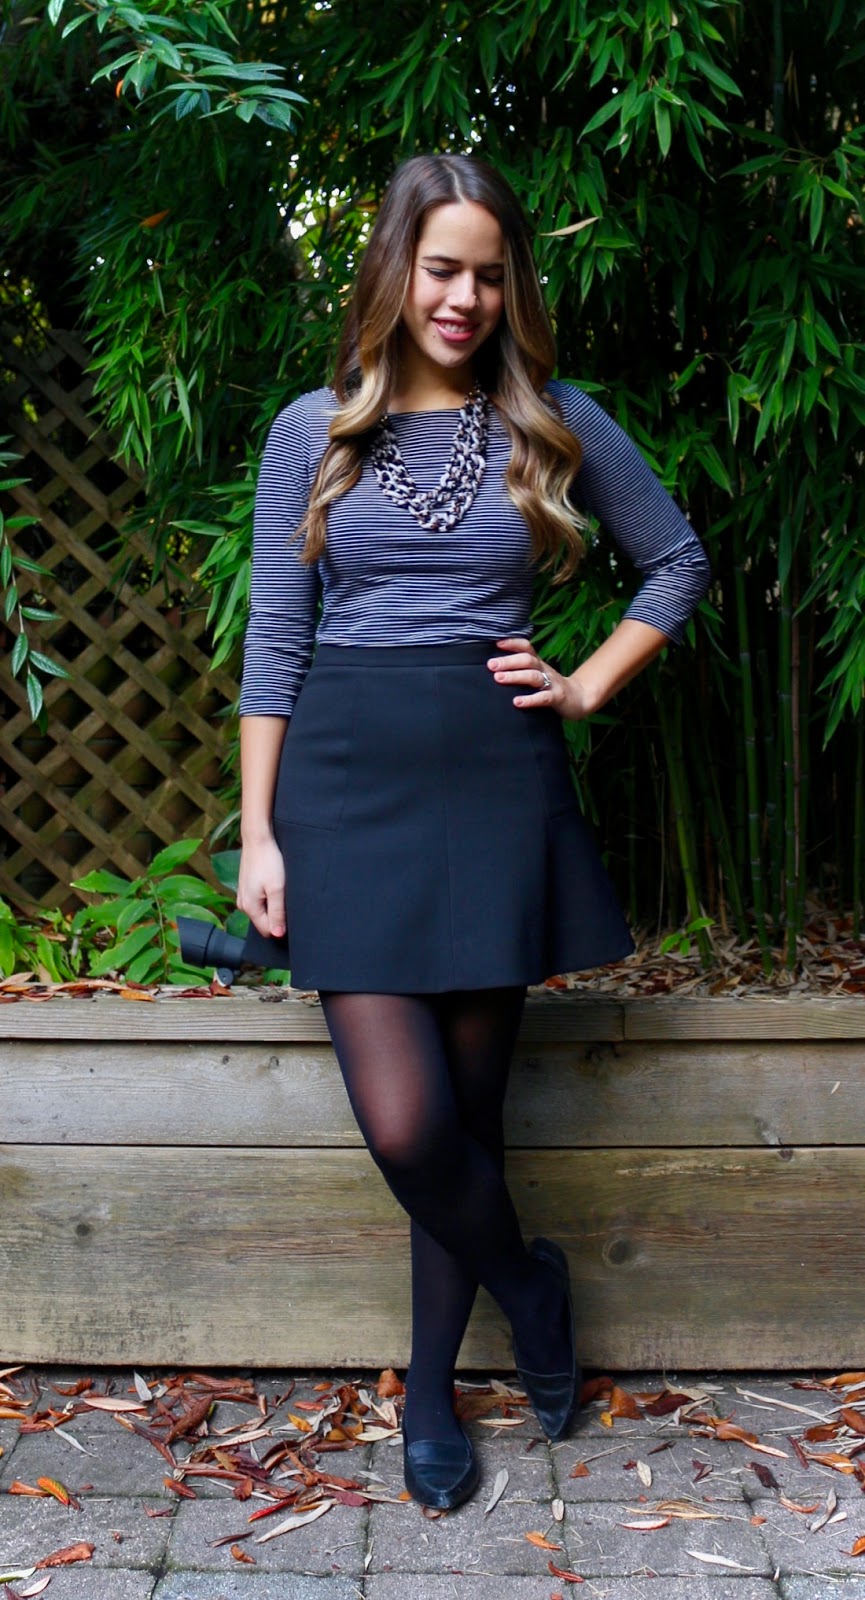 Jules in Flats - Striped Top with Black Skater Skirt (Business Casual Fall Workwear on a Budget) 